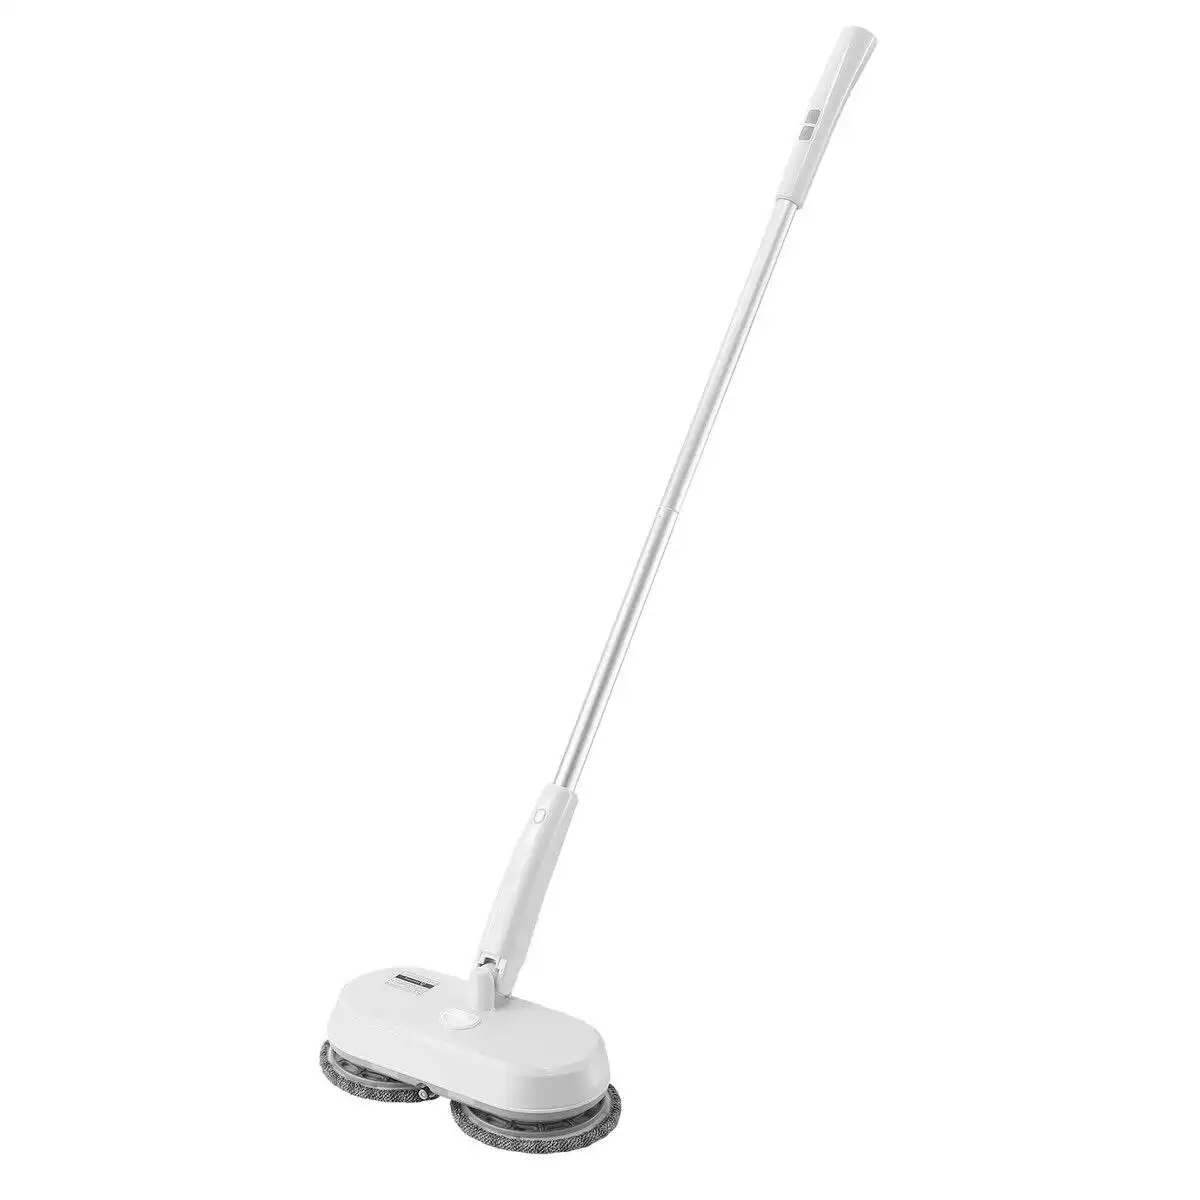 Maxkon 5in1 Electric Spin Mop Cordless Floor Cleaner Sterilization Waxing Polisher Sweeper Washer Tile Wood Dry Wet Cleaning Machine Disinfection